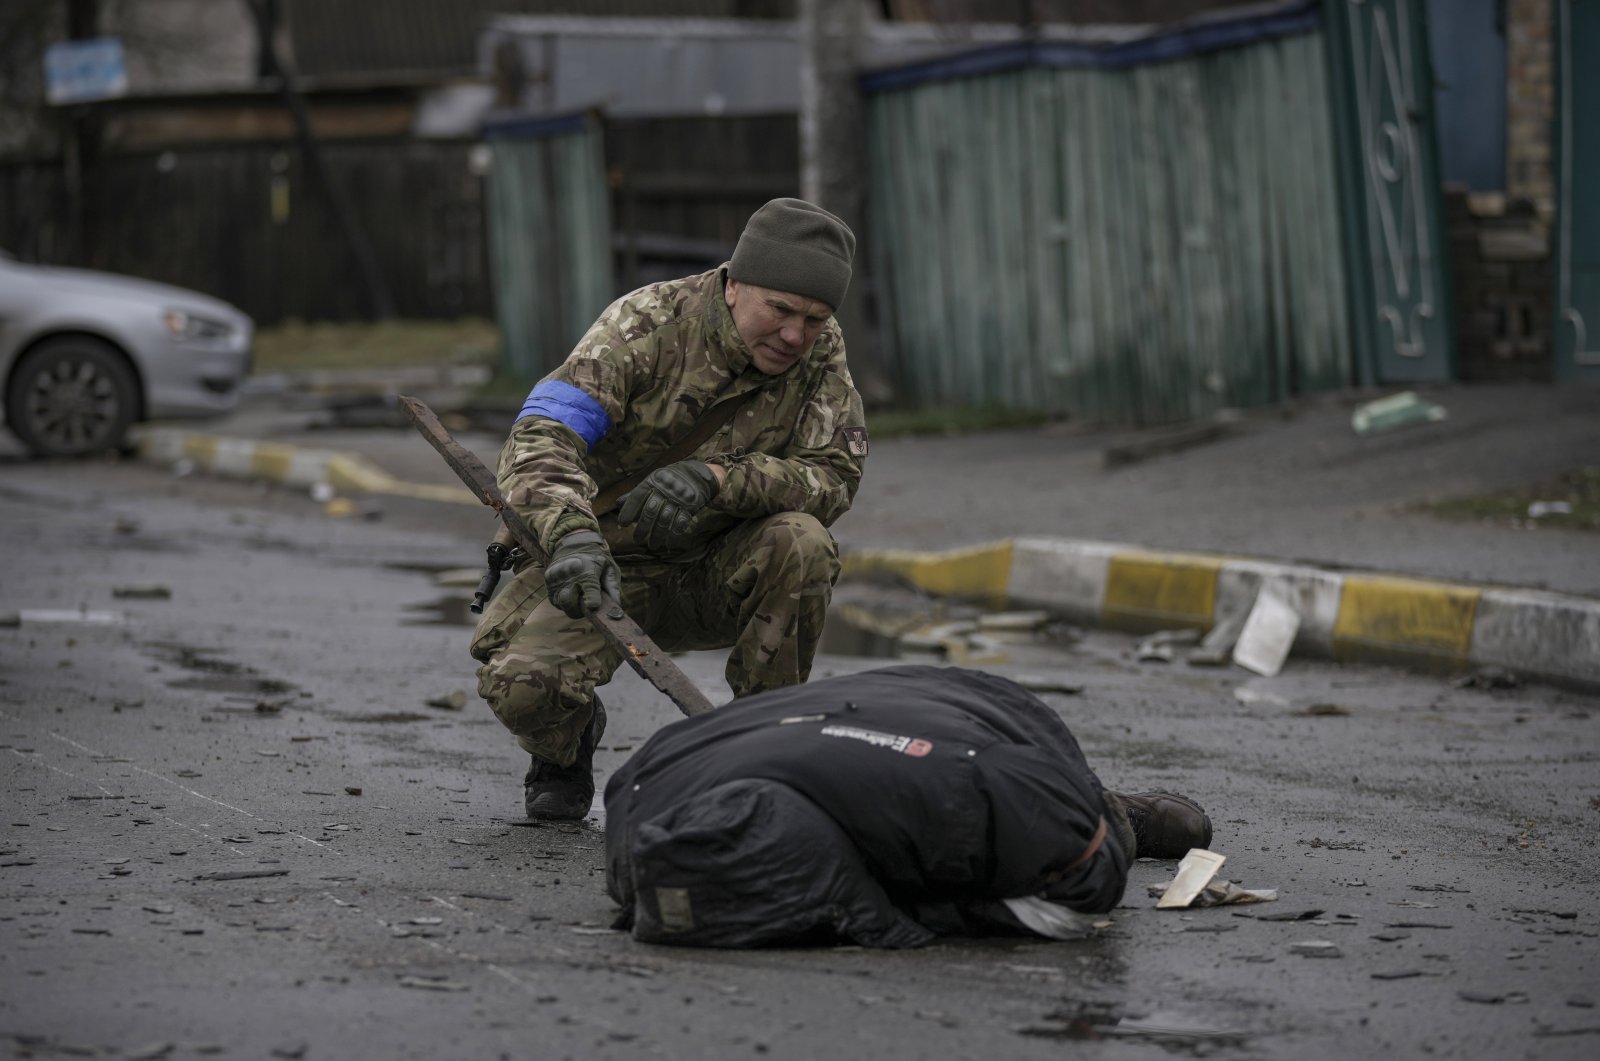 A Ukrainian soldier uses a piece of wood to check if the body of a man dressed in civilian clothing is booby-trapped with explosive devices, in the formerly Russian-occupied Kyiv suburb of Bucha, Ukraine, April 2, 2022. (AP Photo)